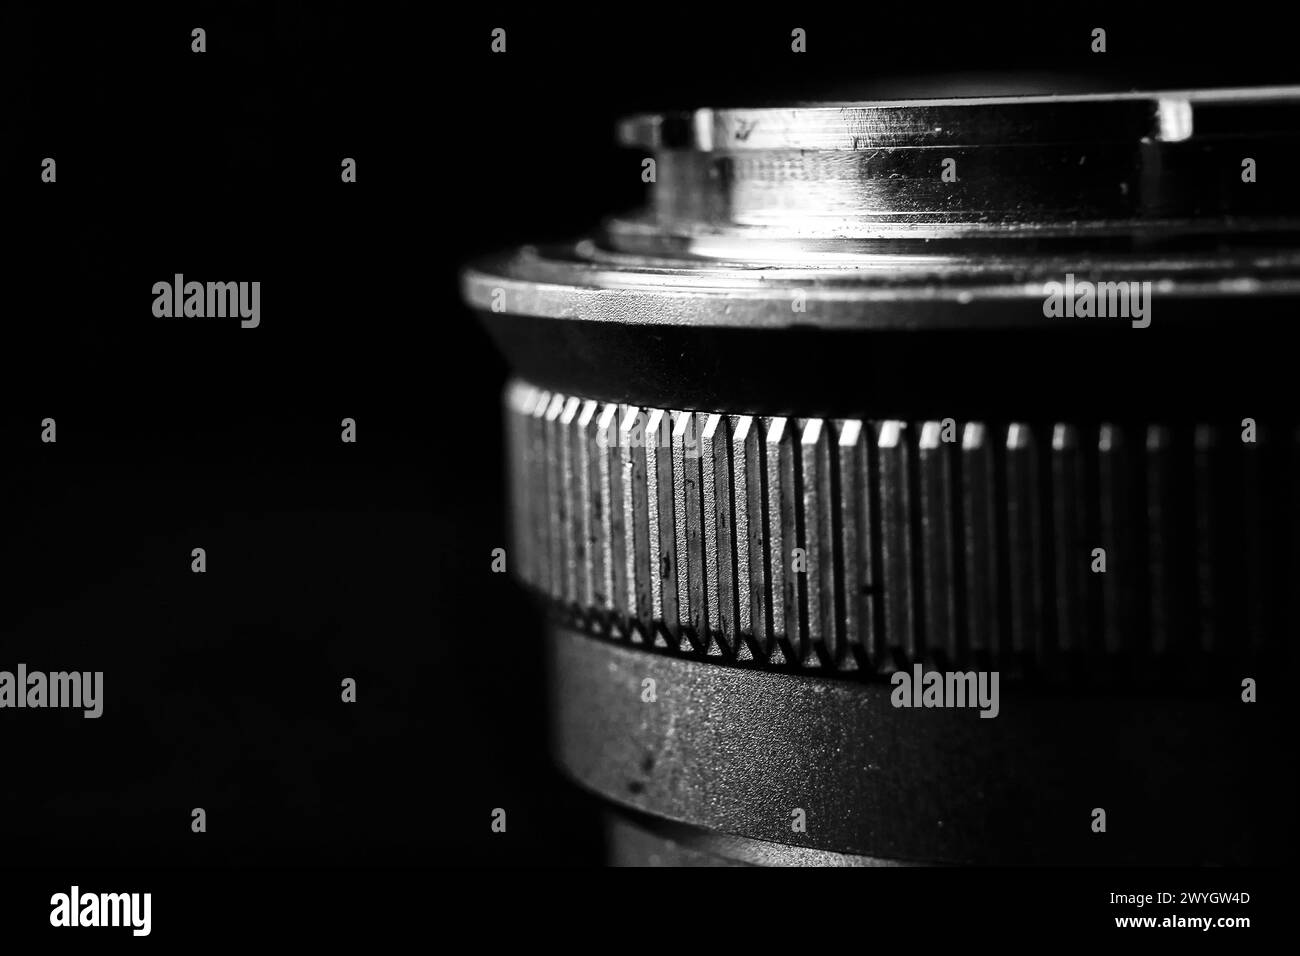 The image is a black and white close-up of a camera lens. The lens has several curved glass elements and a metal housing. Stock Photo